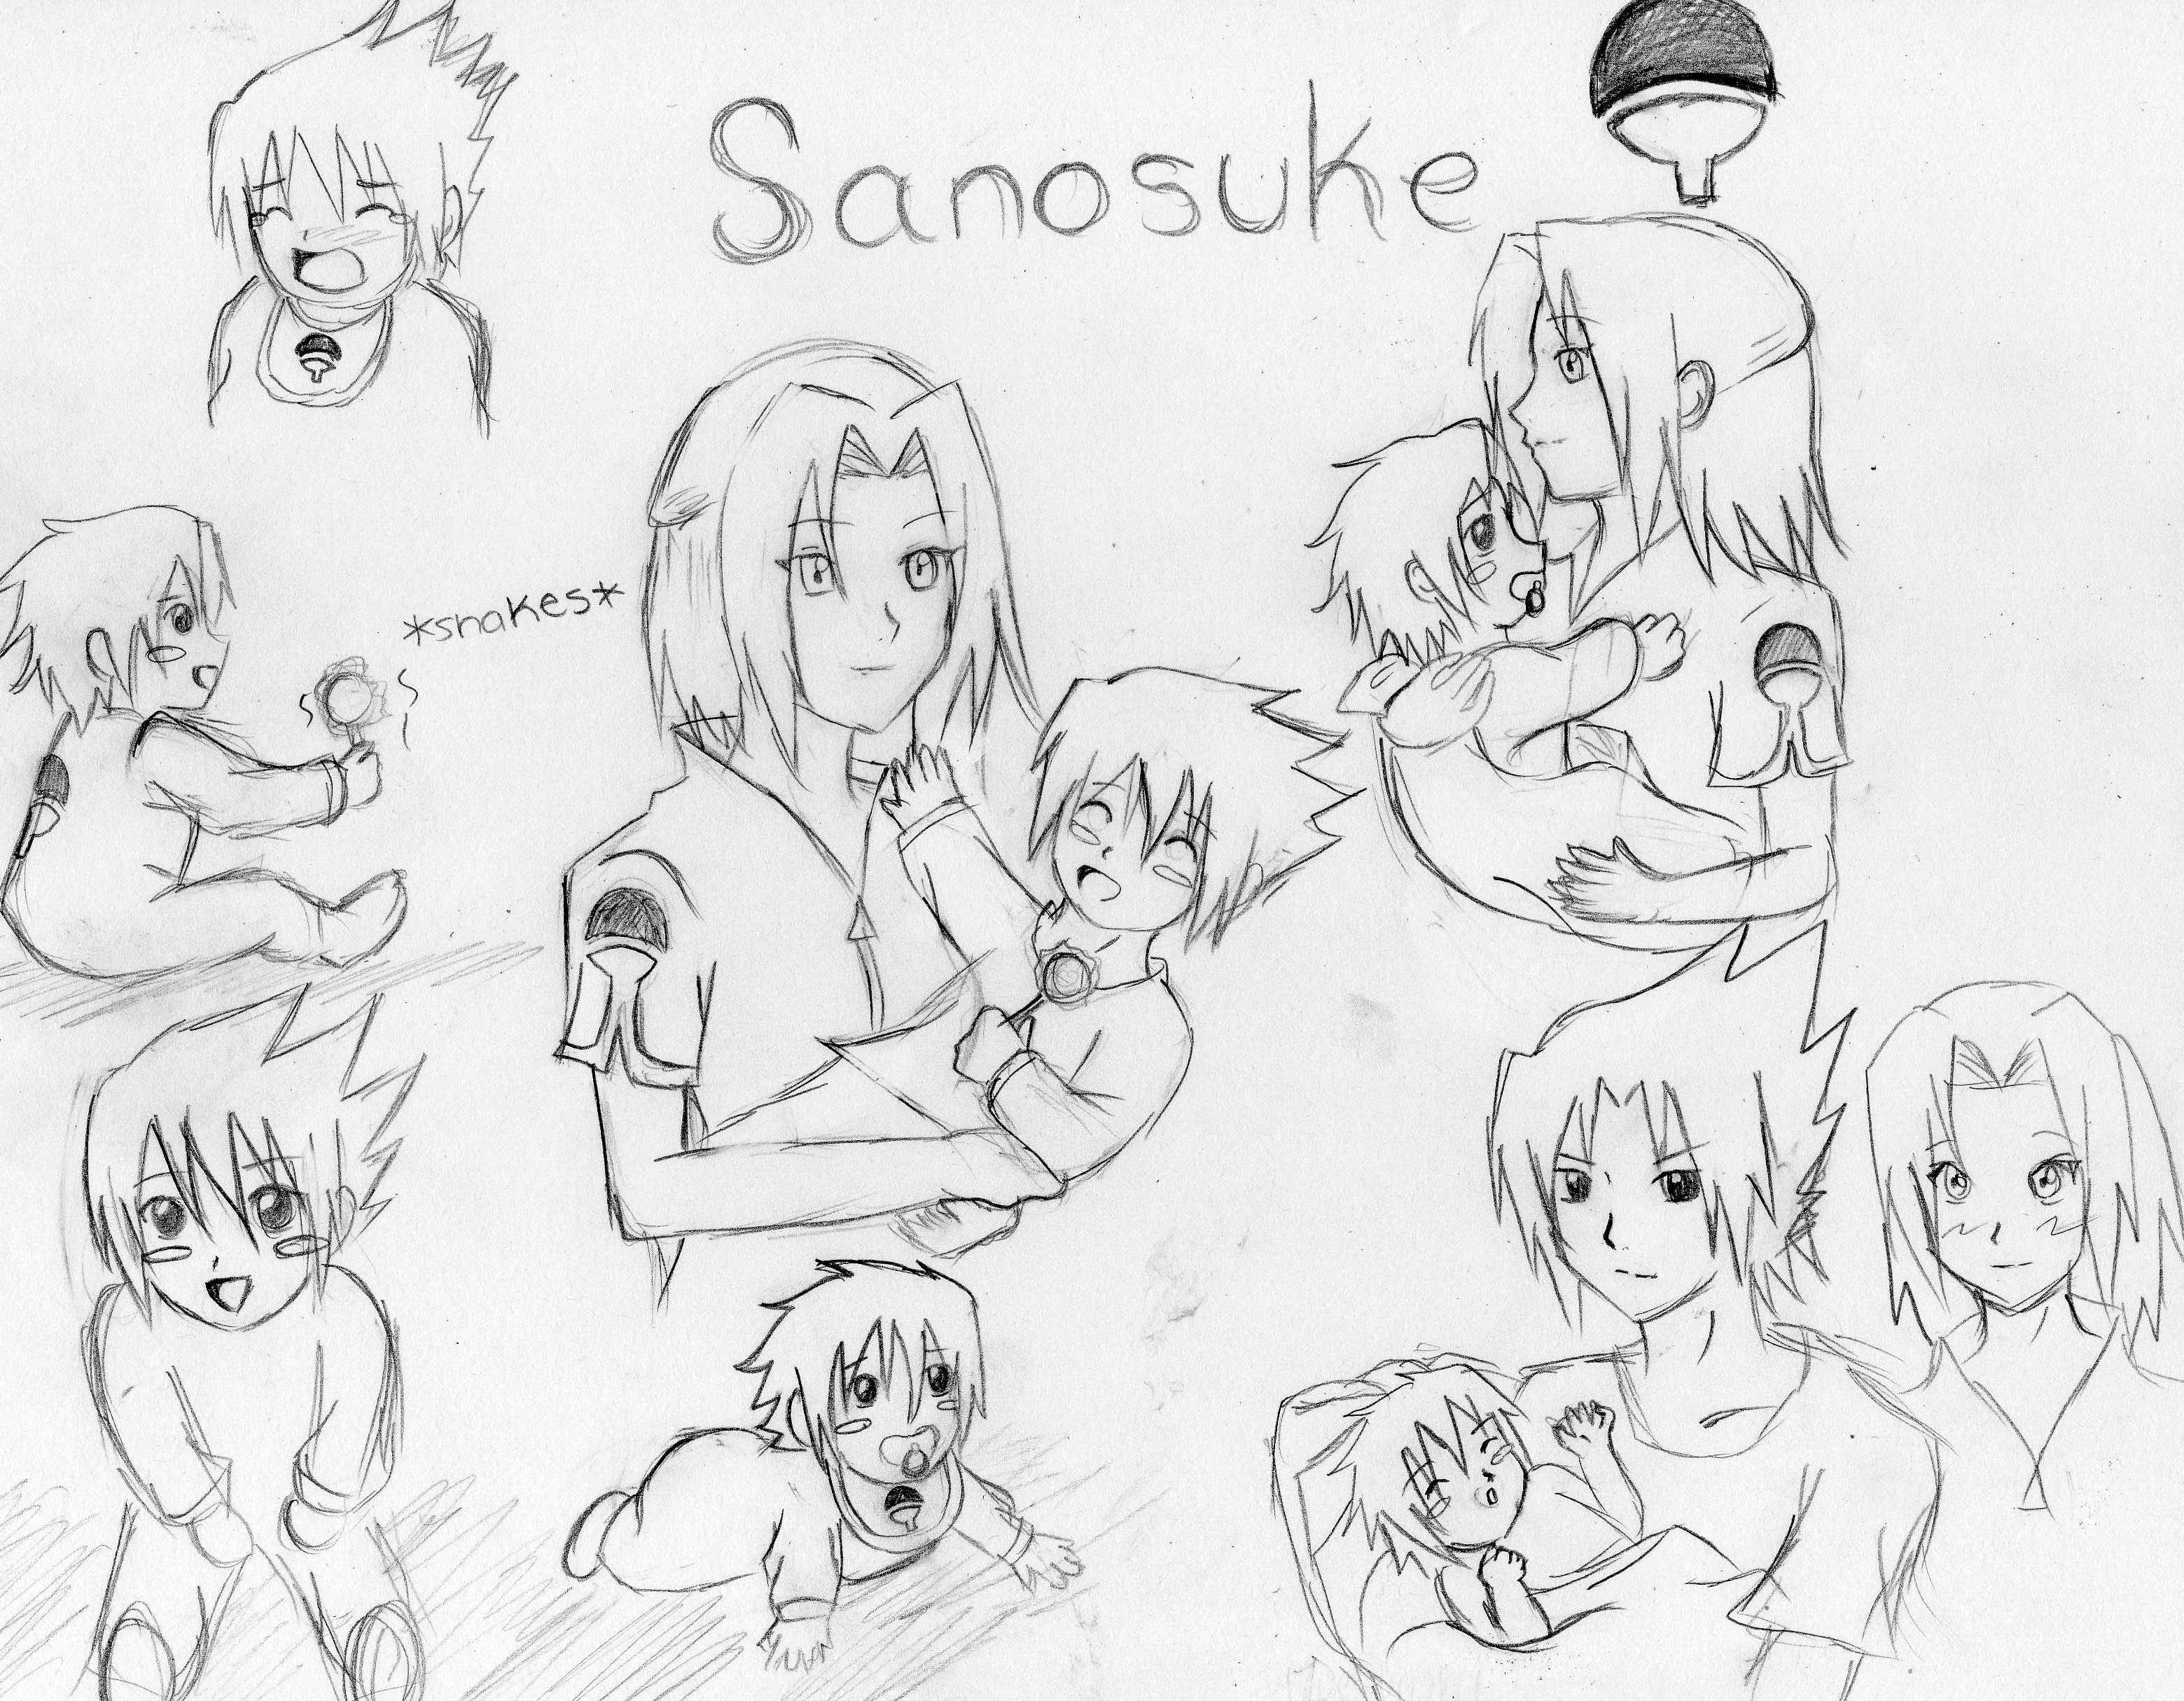 May the Uchiha Clan Live on! XD by DarknessEternity1027